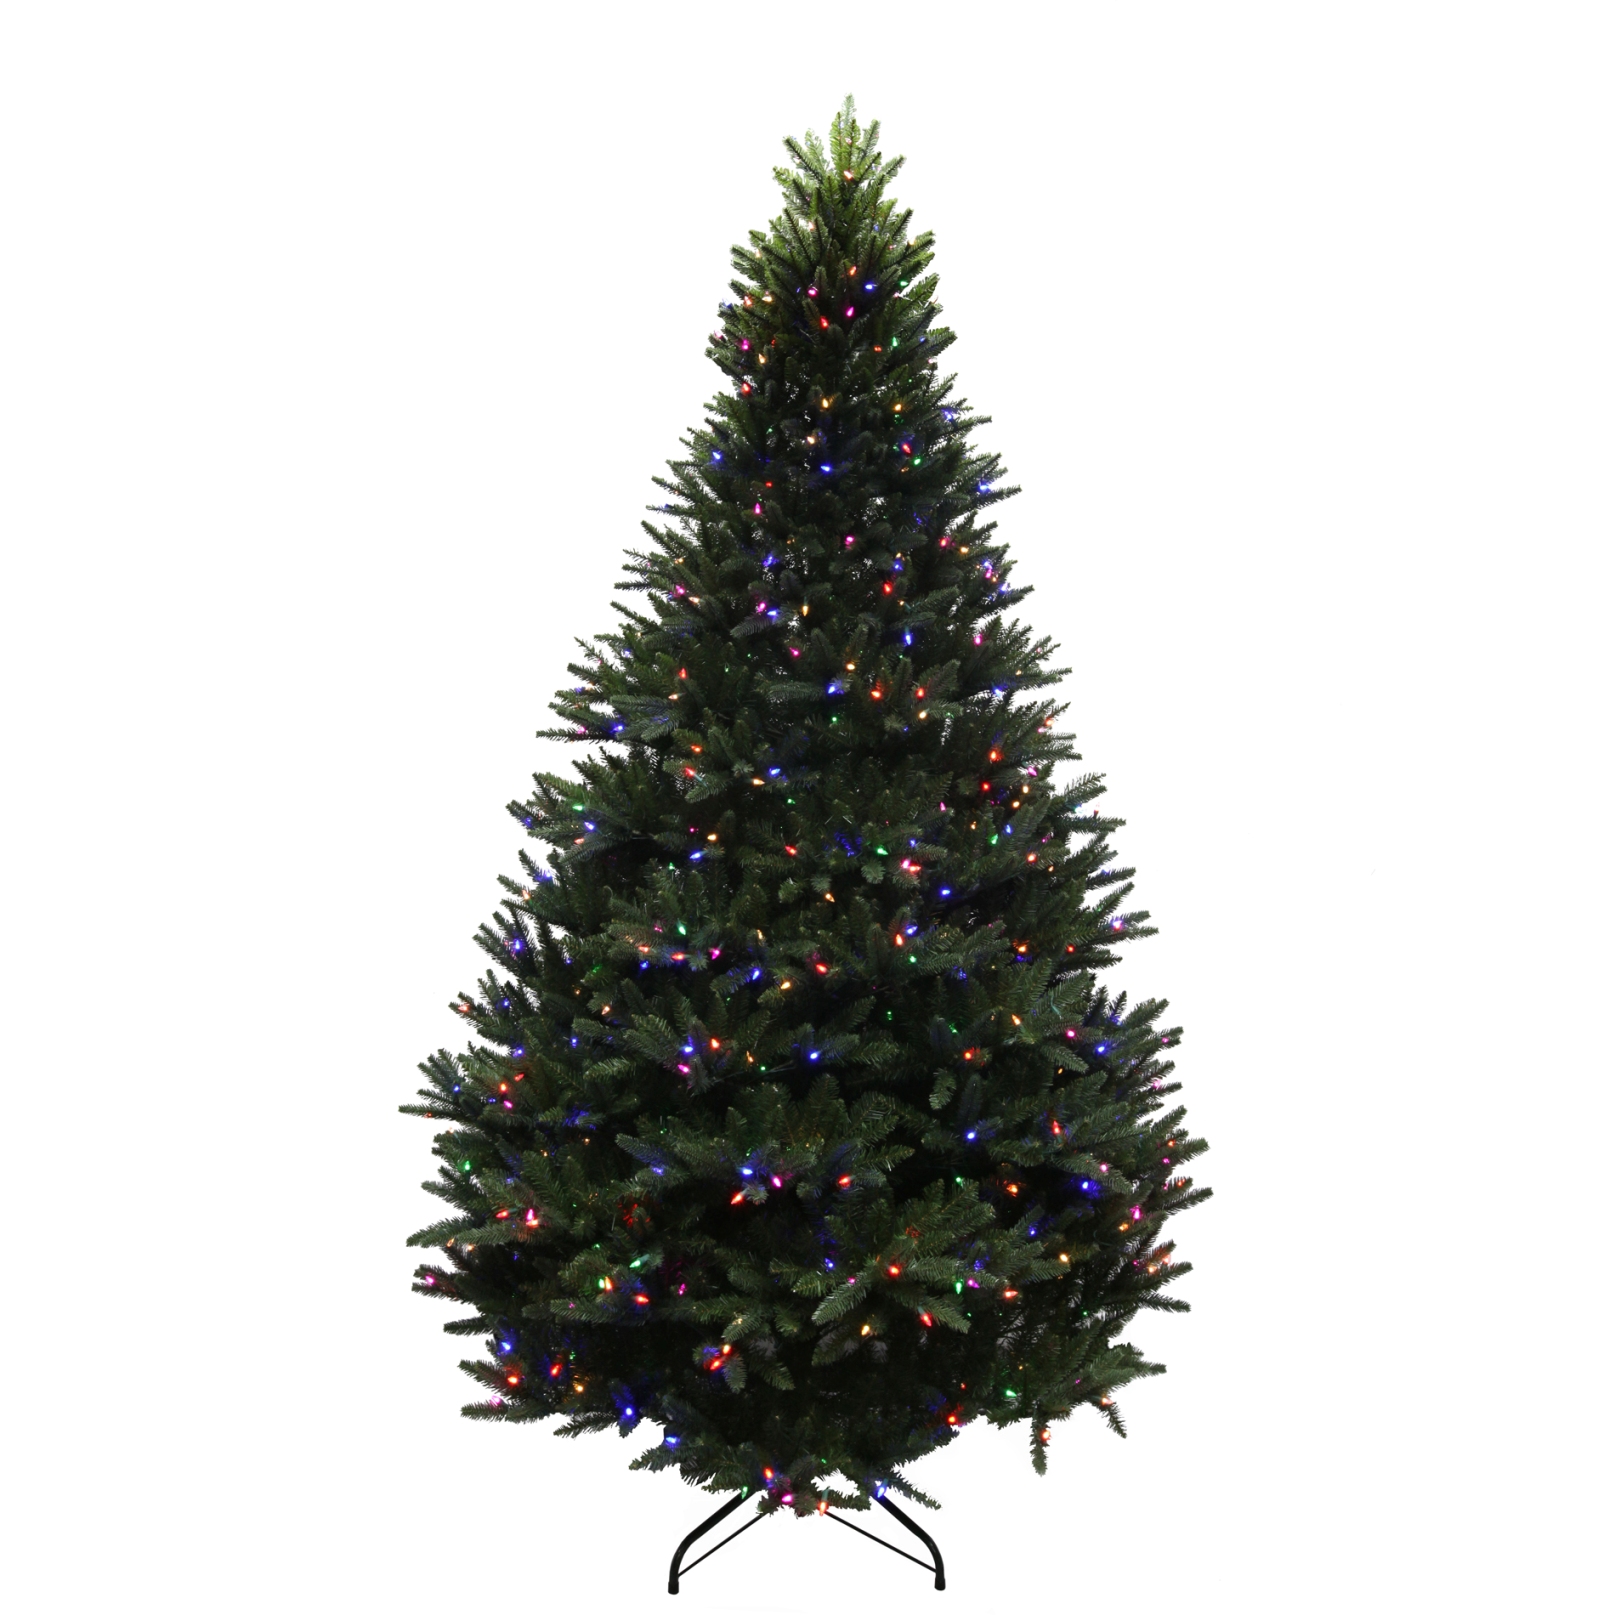 9' Christmas Fraser Fir Pre-Lit Tree with 49 lighting functions